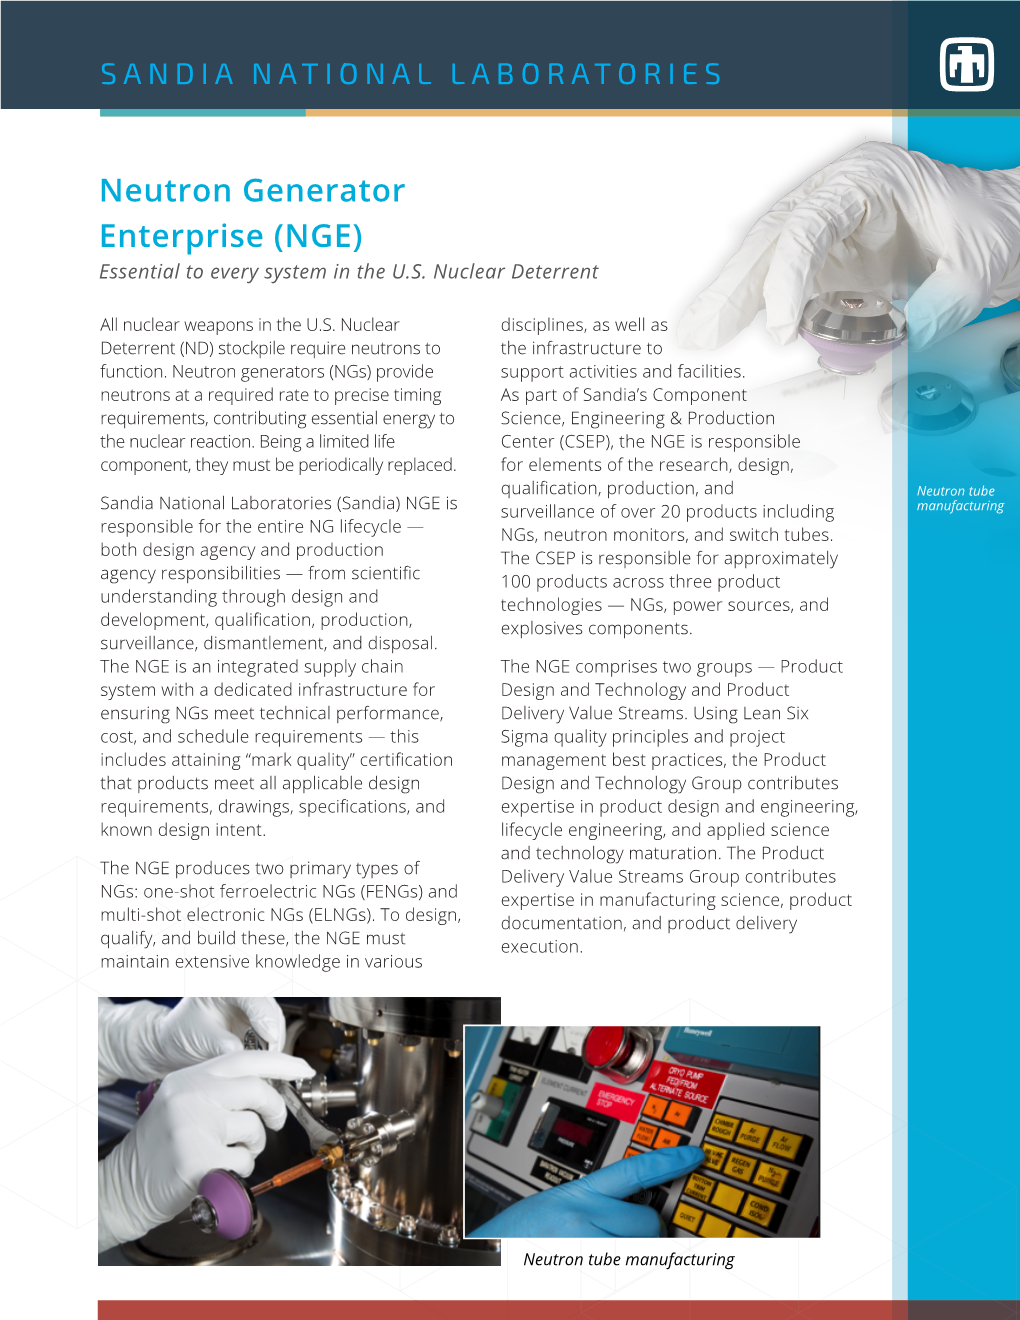 Neutron Generator Enterprise (NGE) Essential to Every System in the U.S